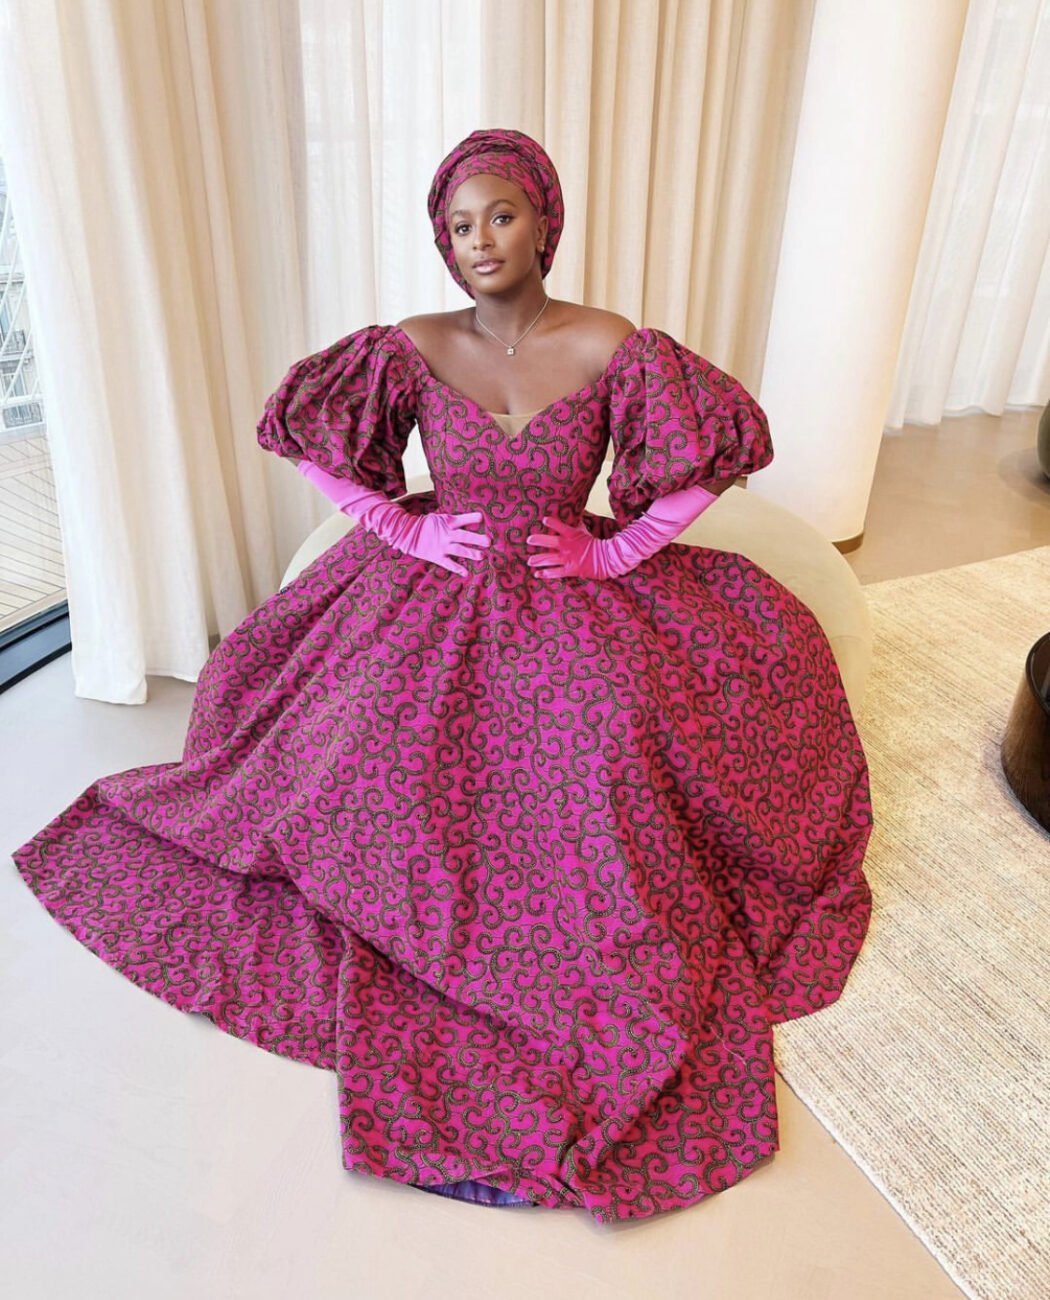 Dj Cuppy in a pink Ankara outfit.